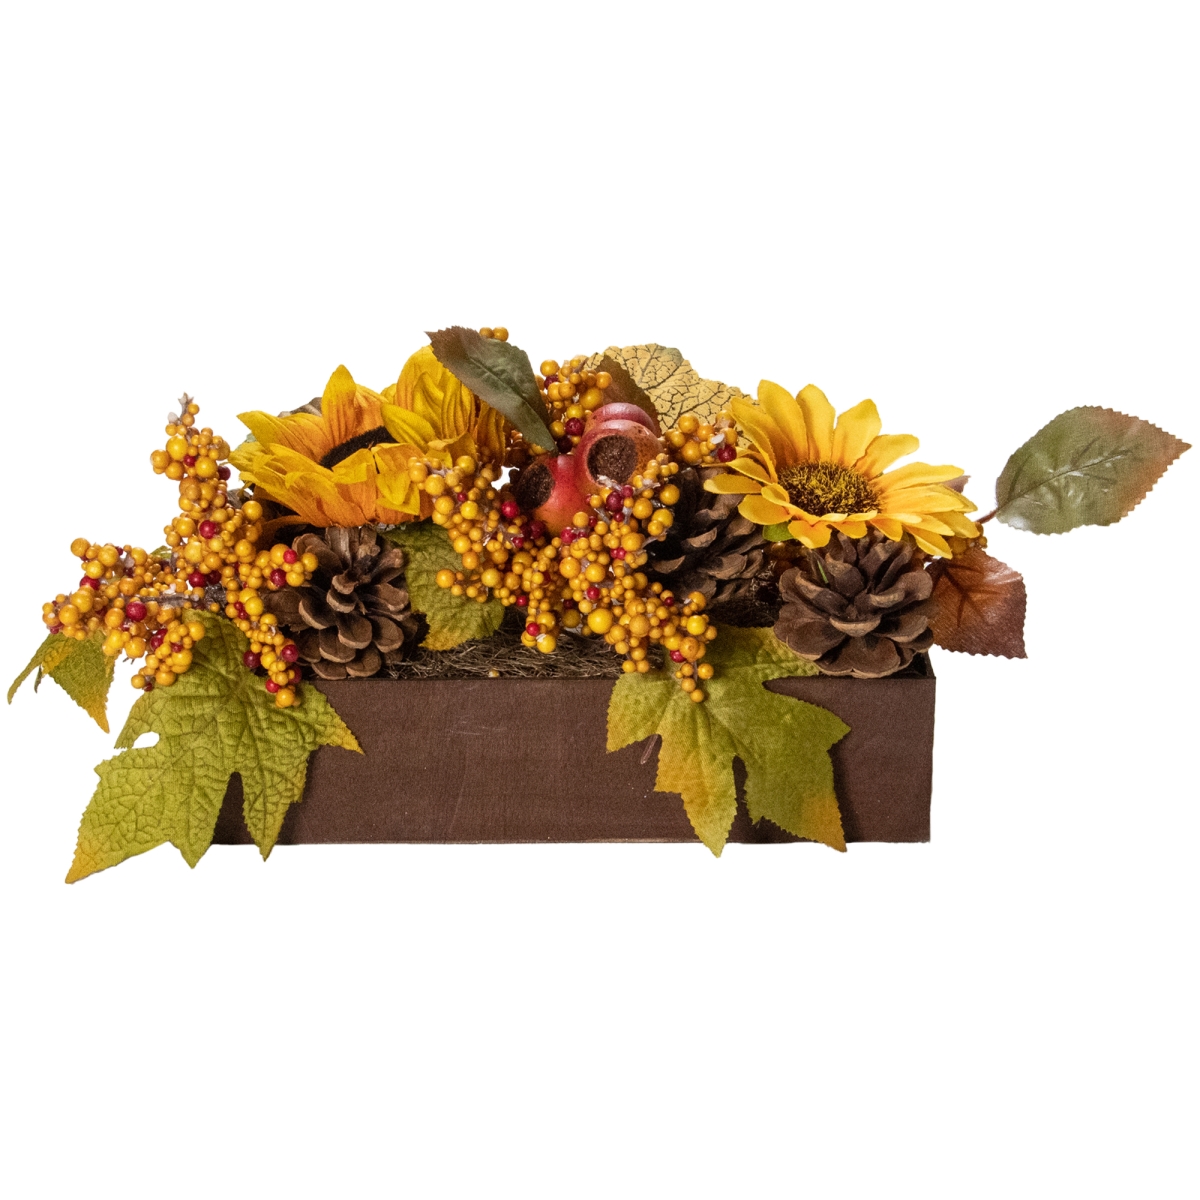 12 in. Sunflowers & Leaves Spring Floral Arrangement, Yellow & Brown -  LovelyHome, LO1772130